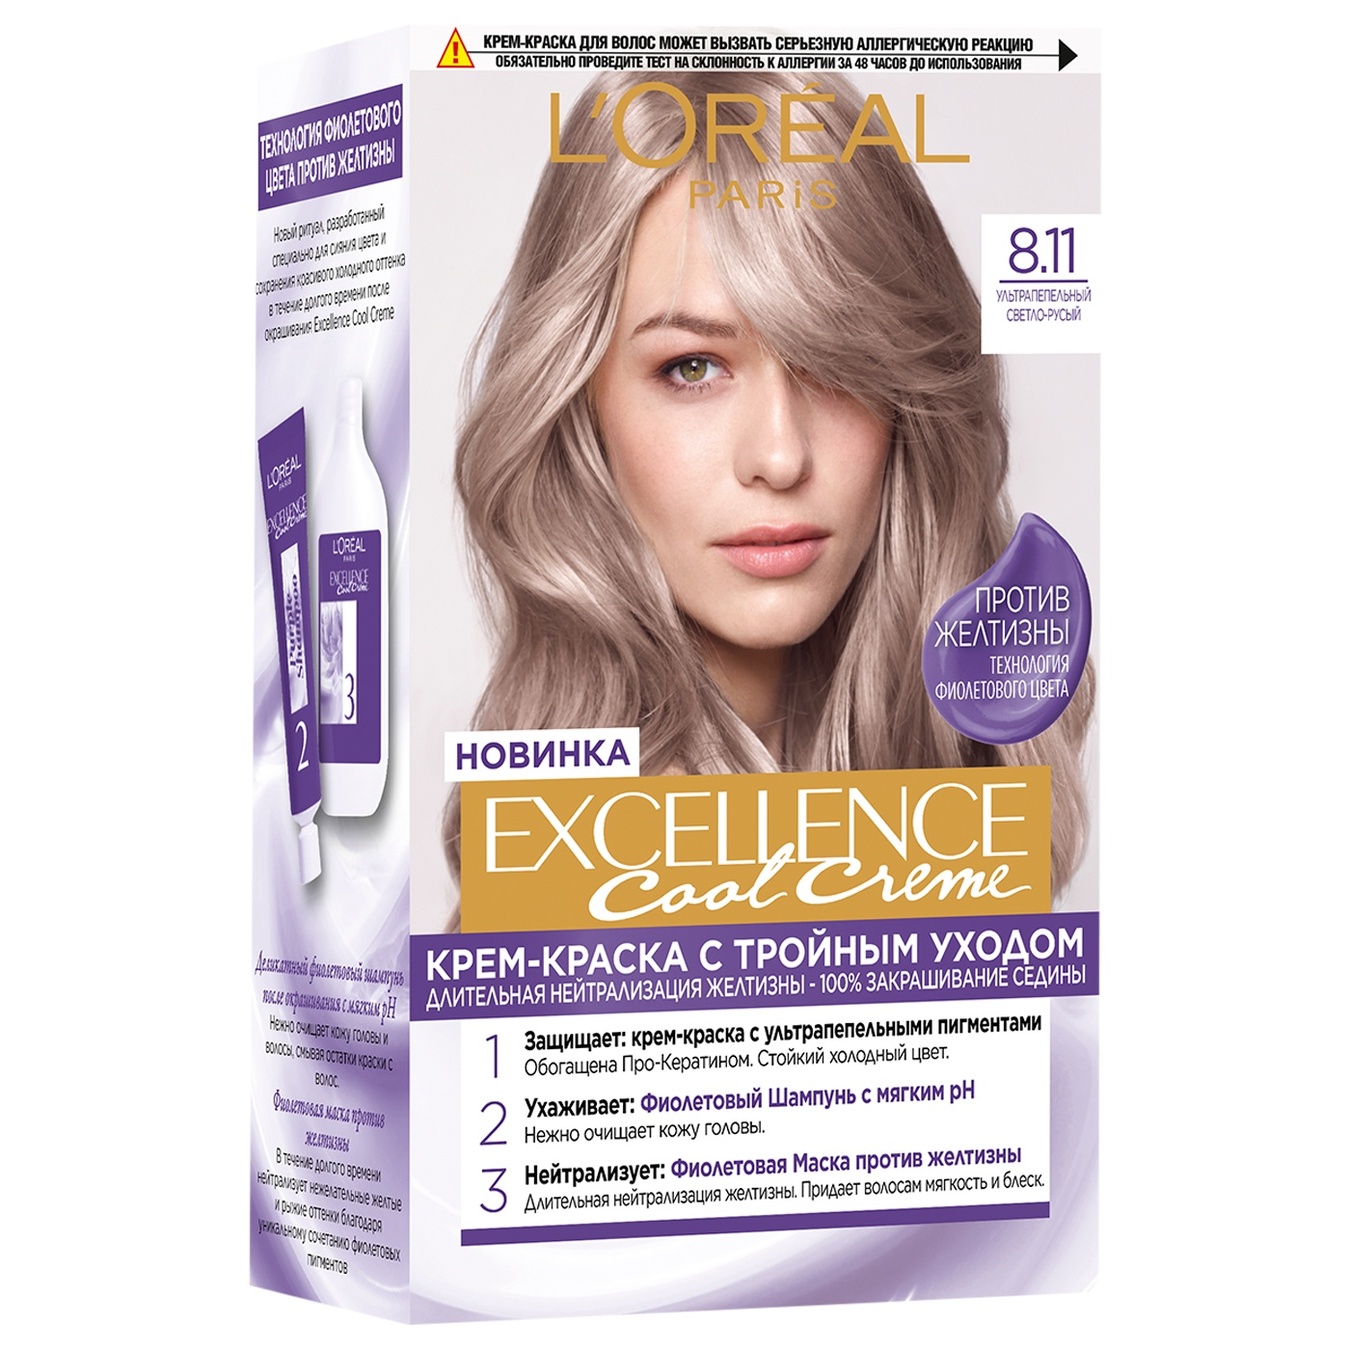 L'Oreal Excellence Cool Creme permanent hair dye cream 8.11